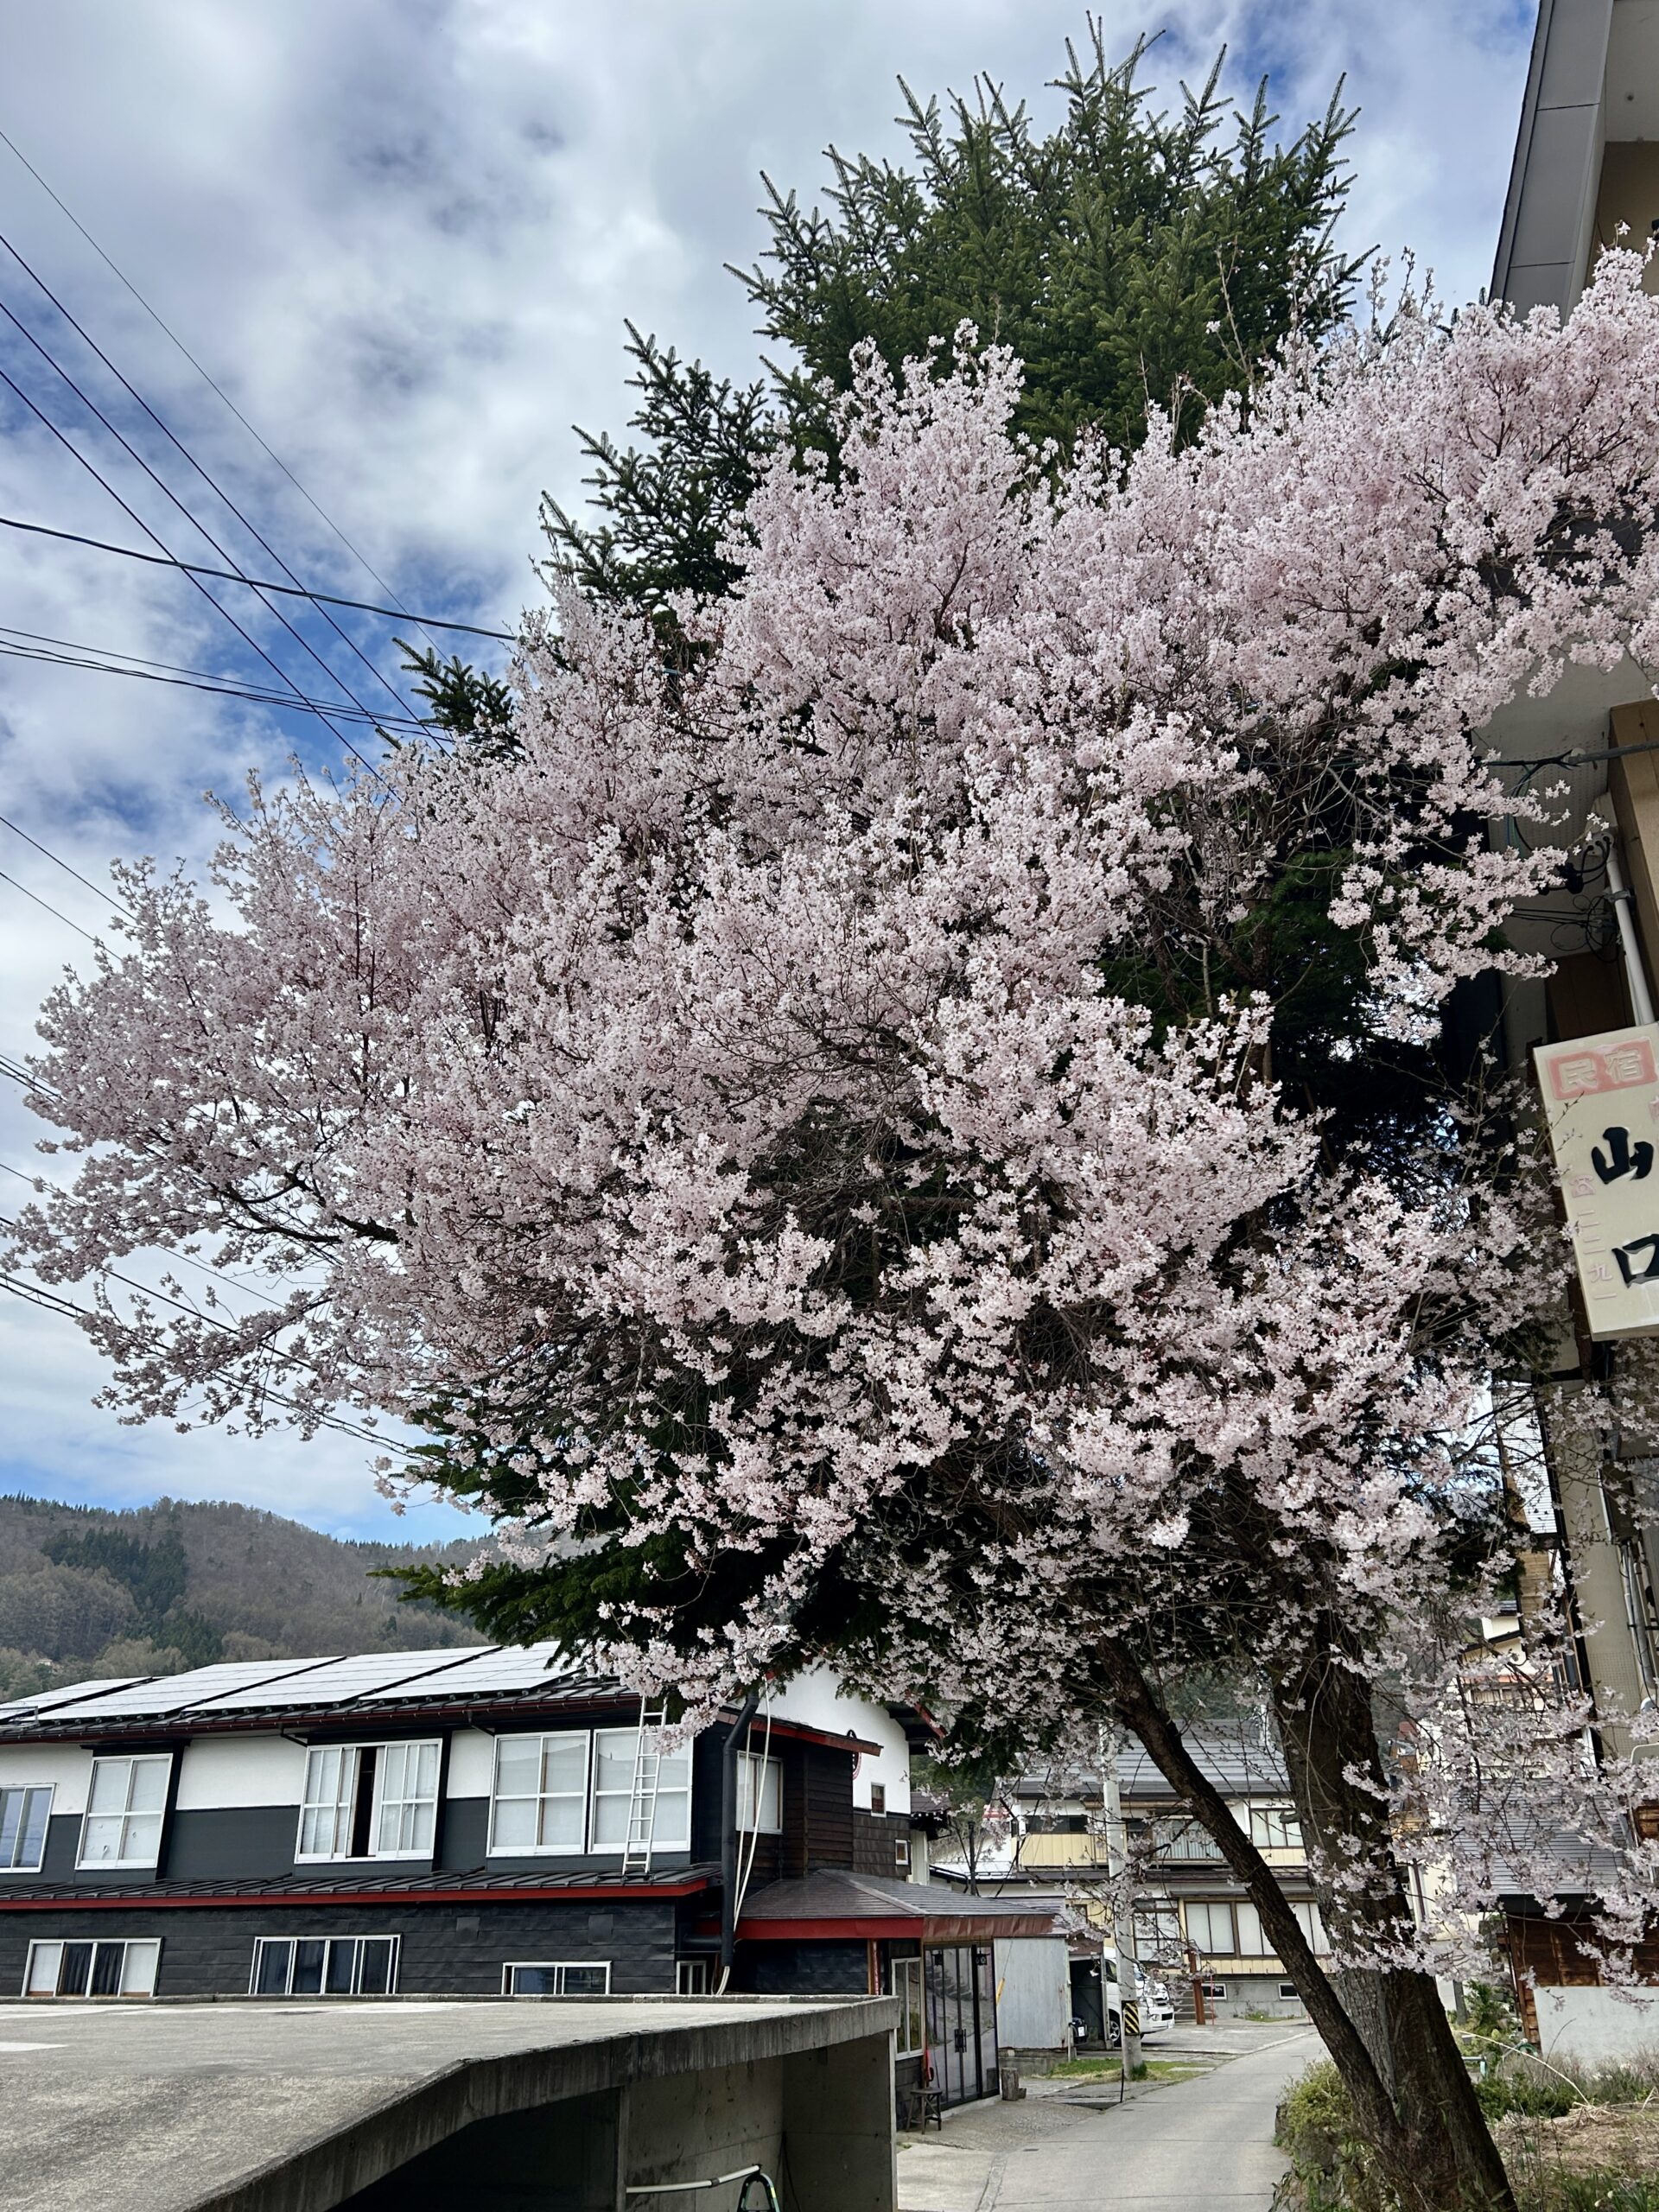 Blossoming cherry trees made the environments look colourful 